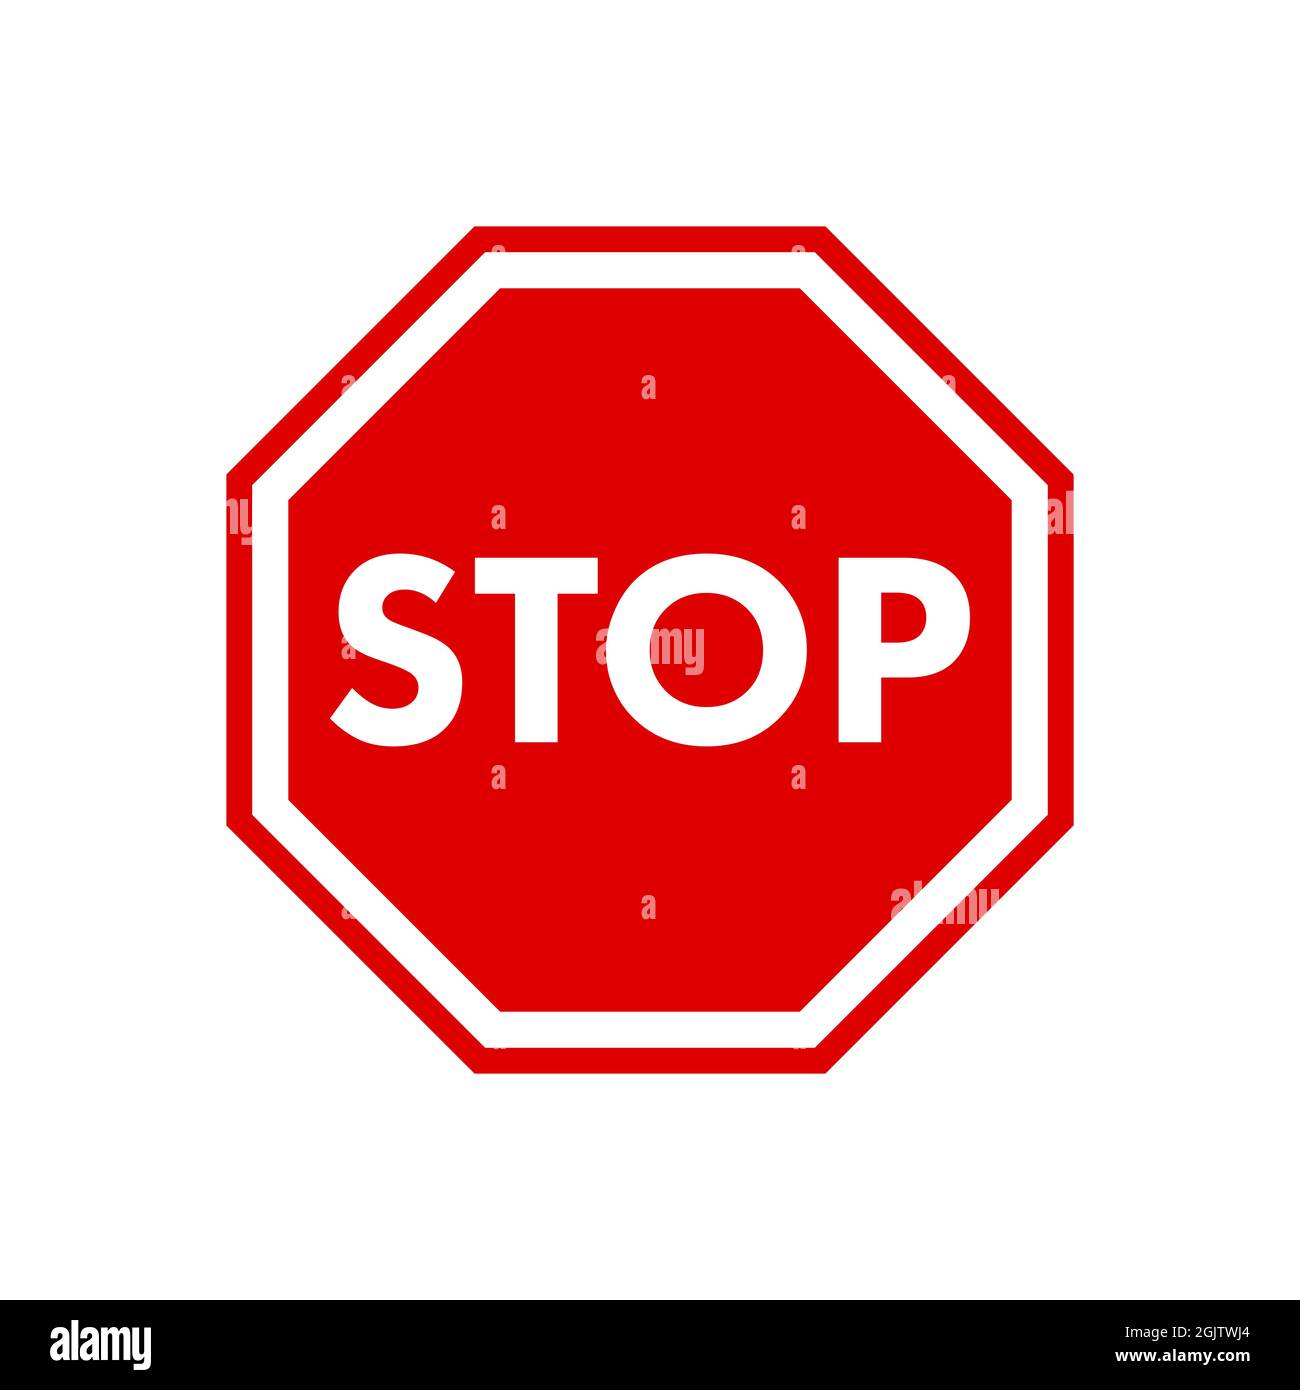 Red stop sign isolated on white background. Traffic warning stop symbol. illustration. Stock Photo